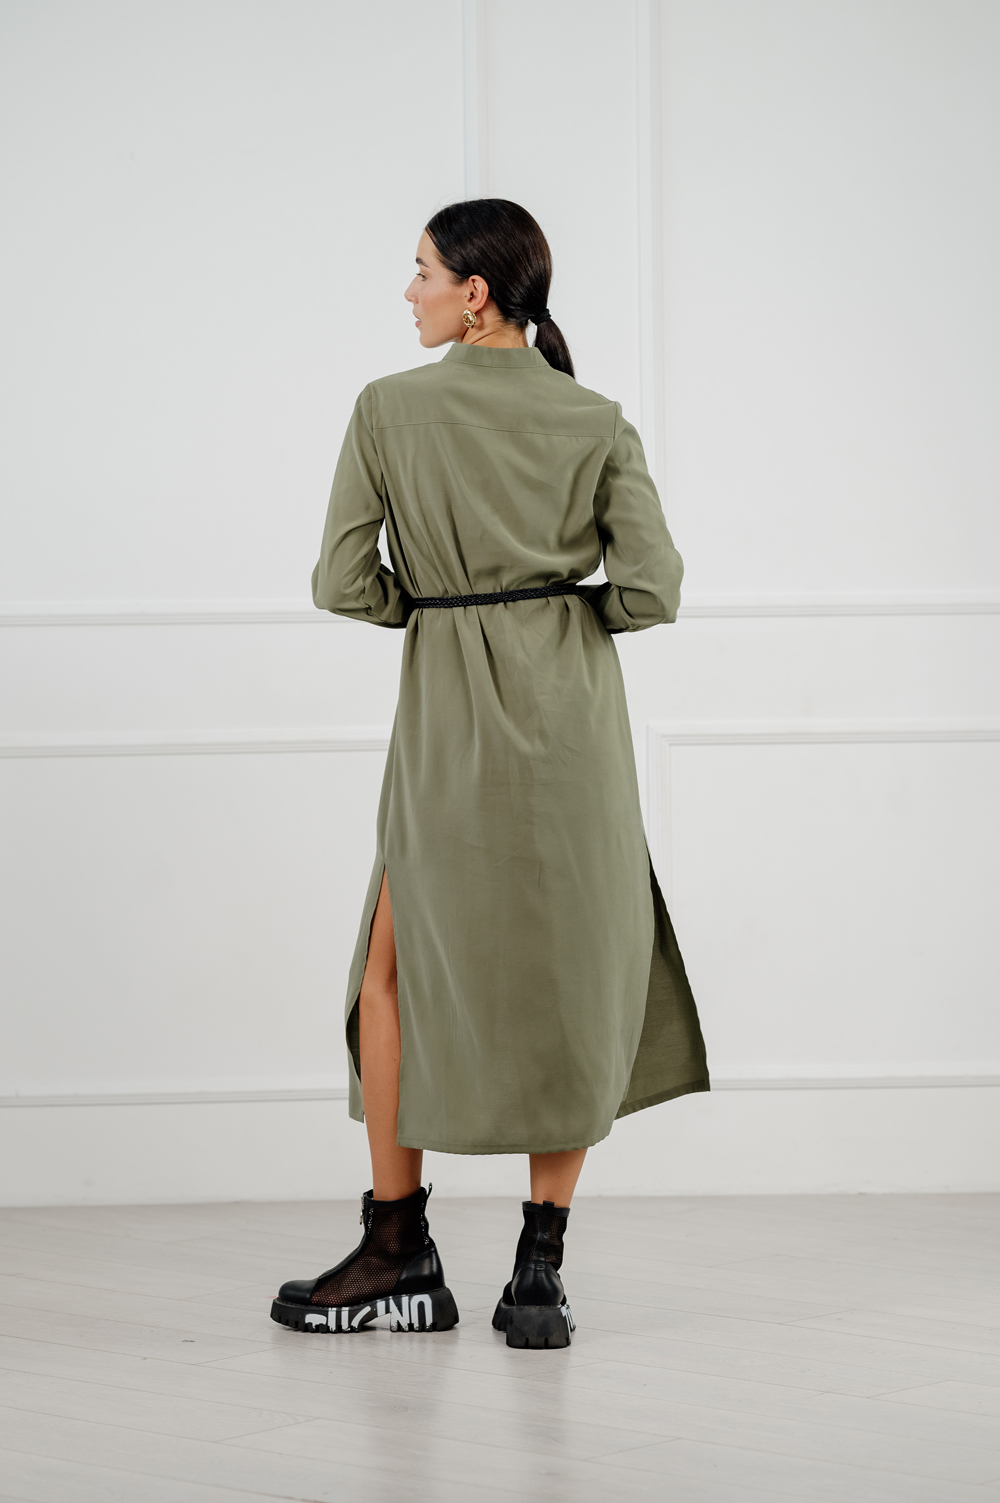 Loose cut dress in a bright on-trend khaki shade